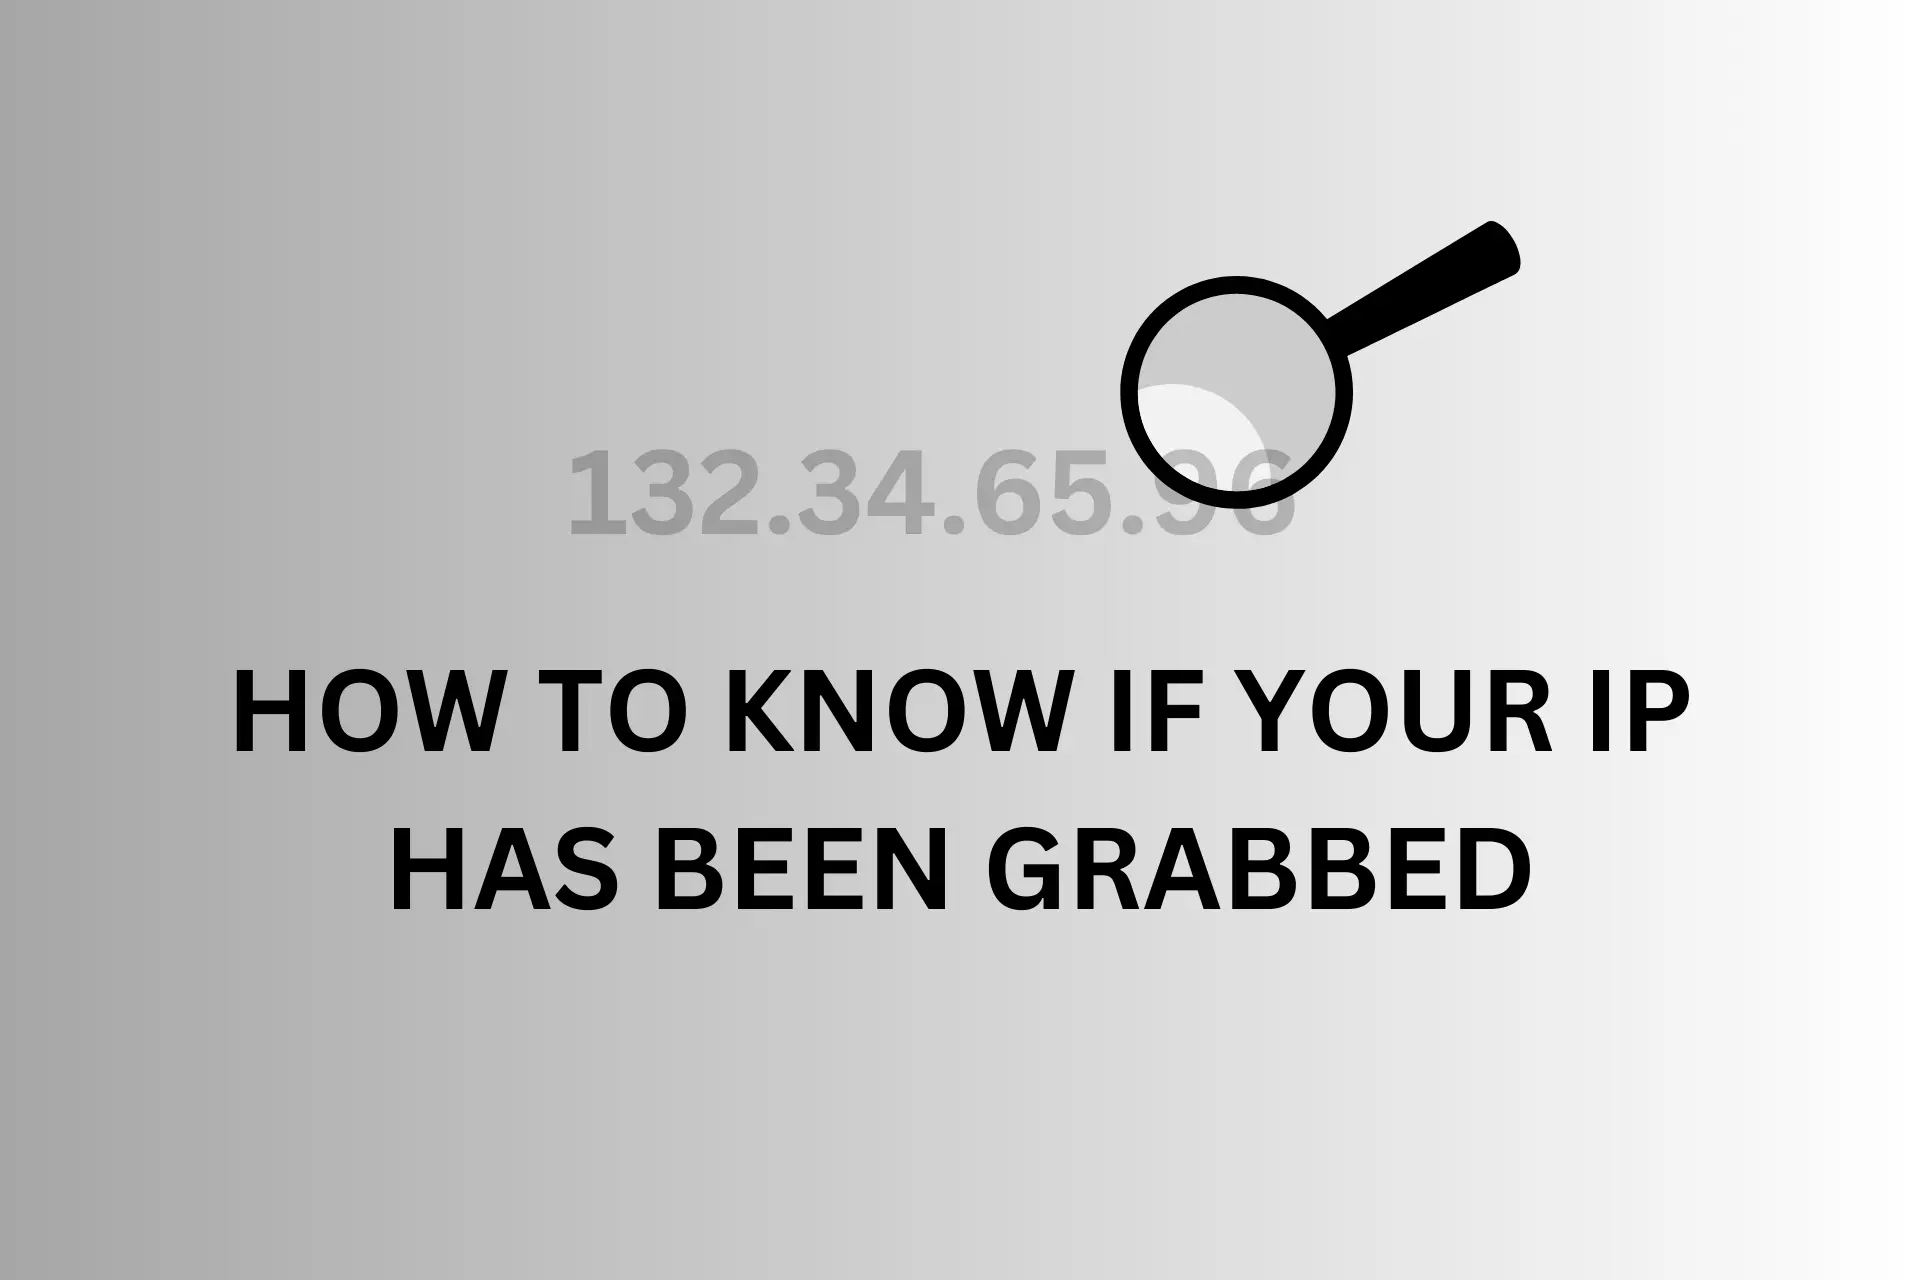 HOW TO KNOW IF YOUR IP HAS BEEN GRABBED